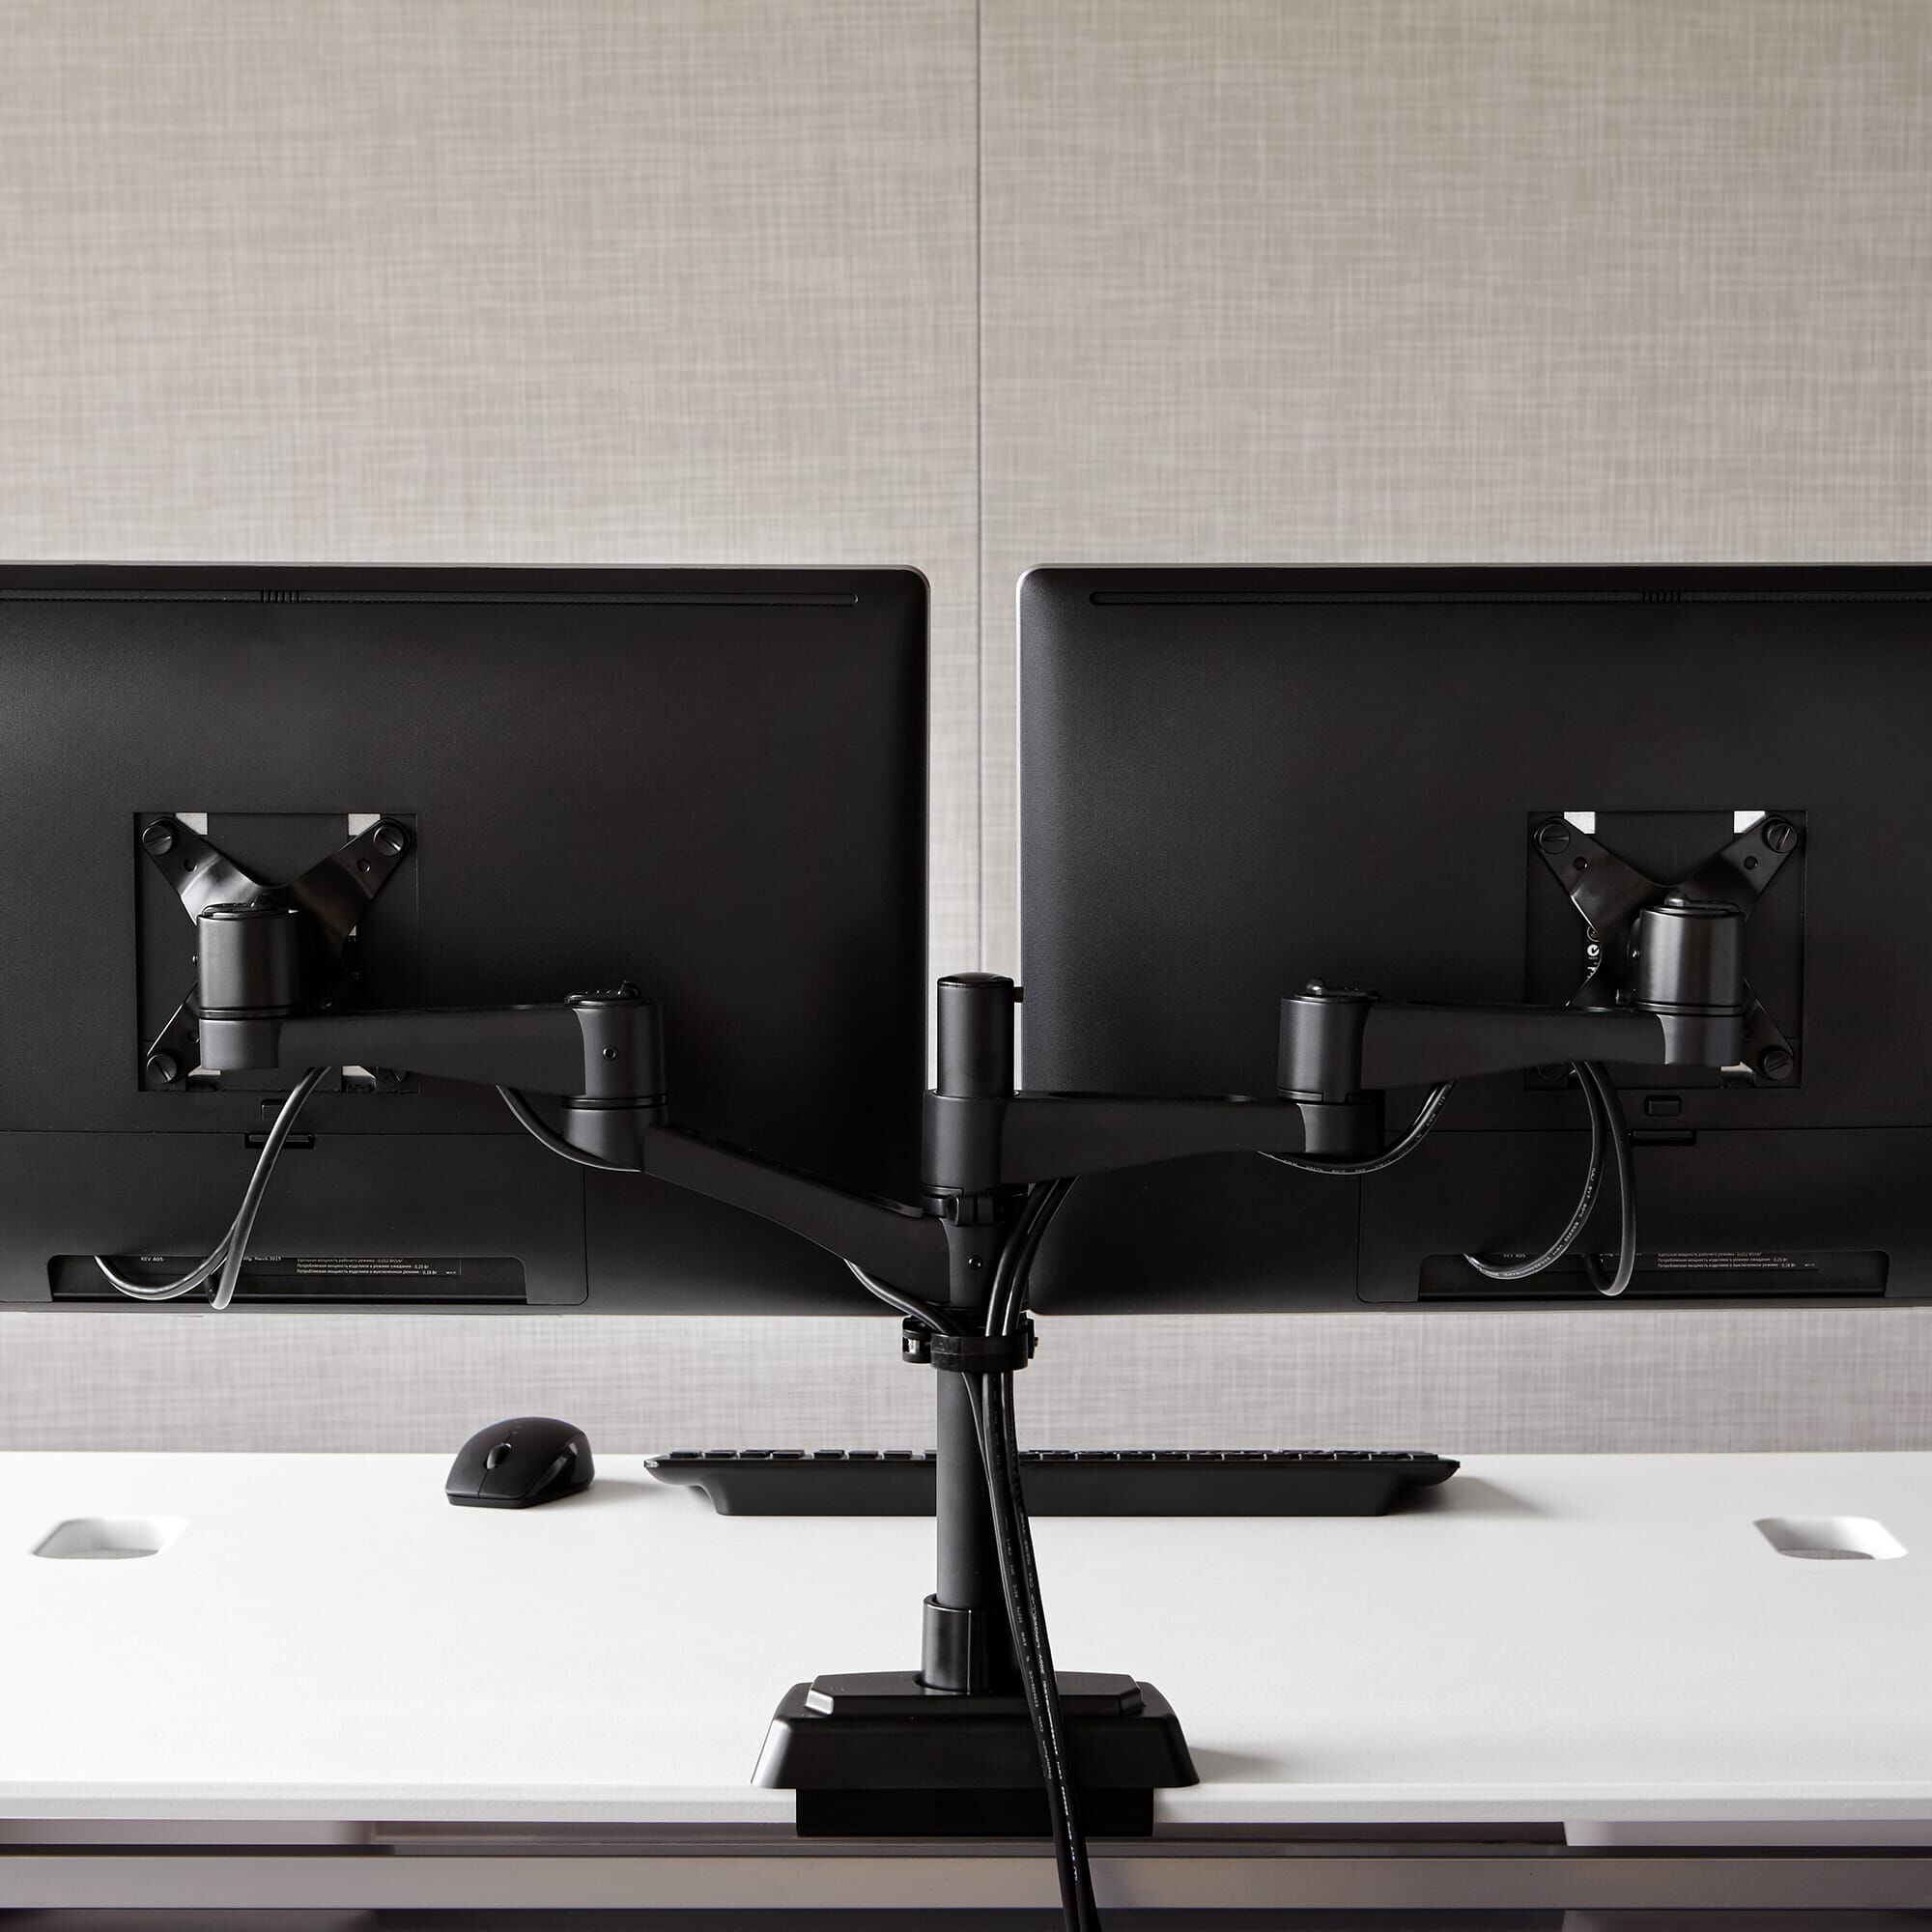 ZG2 Premium Desk Mounted Dual Monitor Arm with Full Range Range of Motion  That Supports Two Monitors Up 24.5 Pounds or 32 Inches Each 並行 通販 